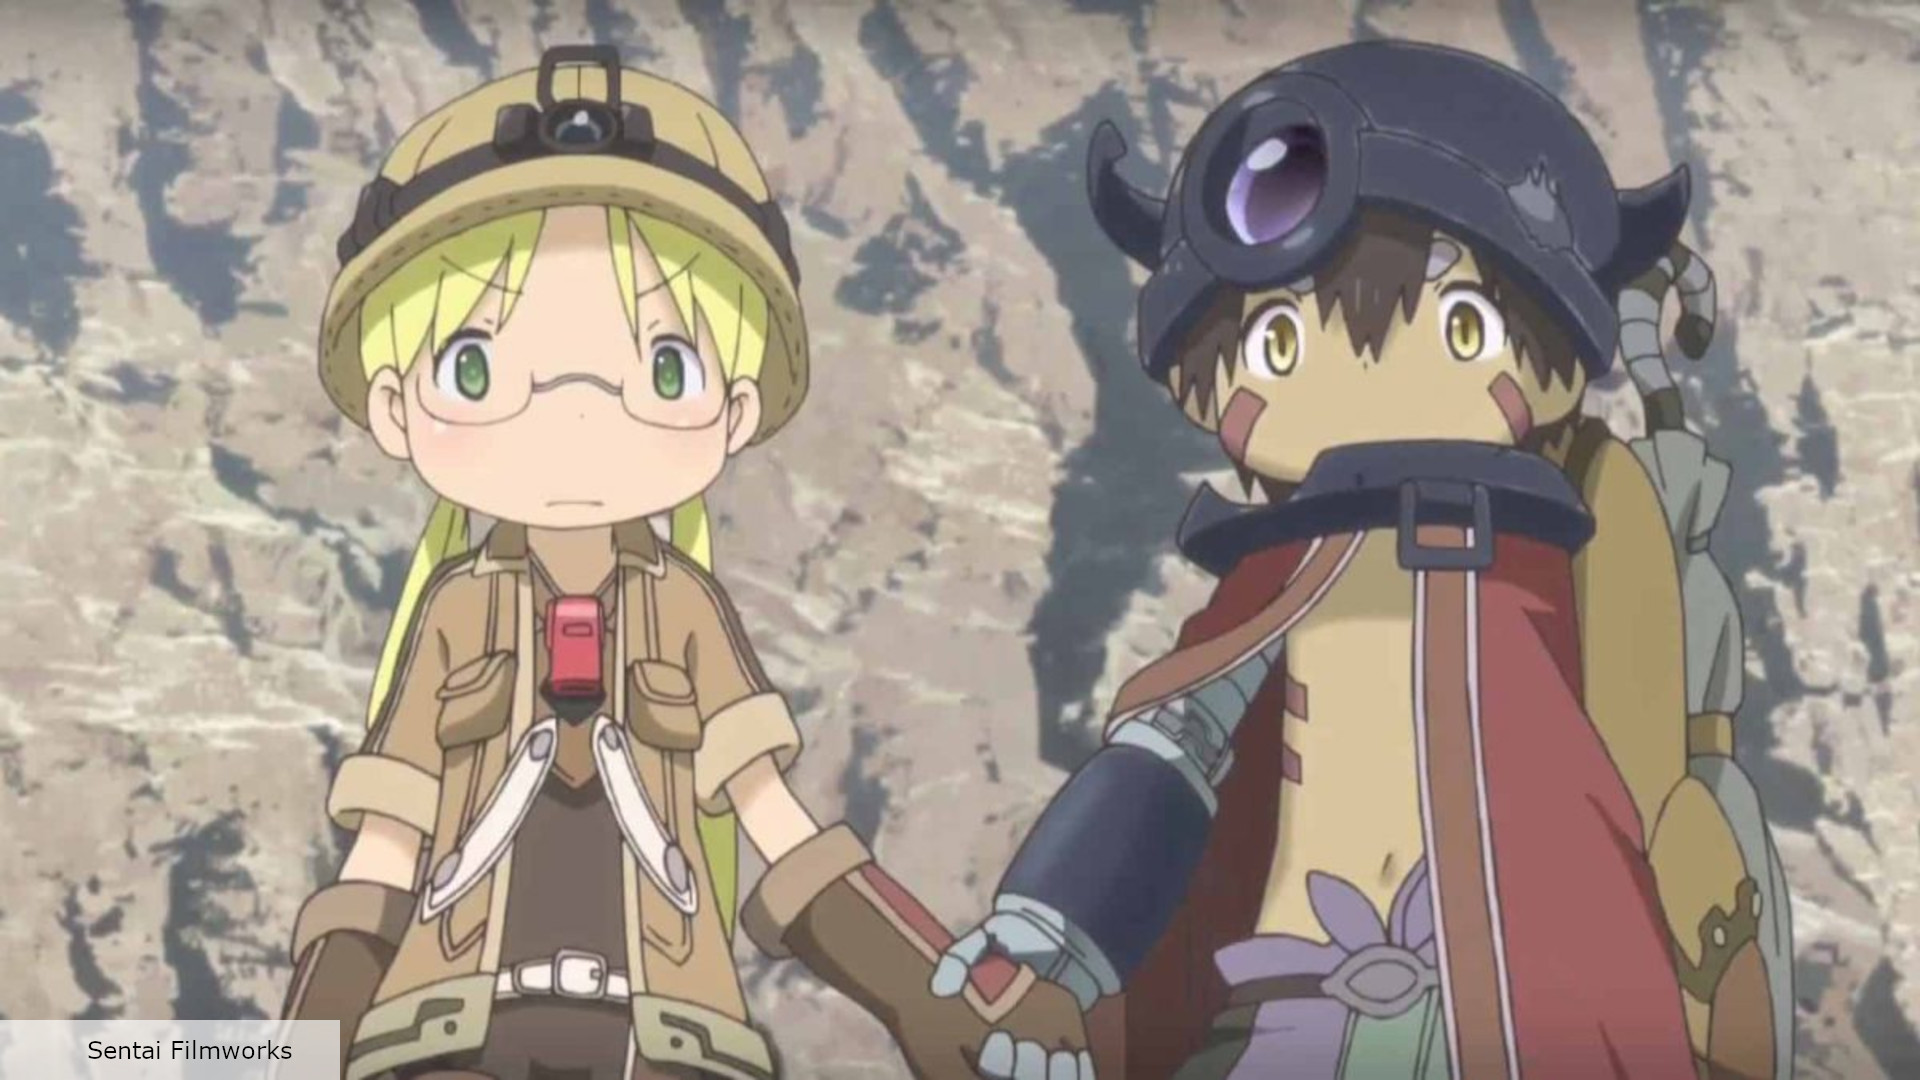 Made in Abyss season 2 trailer teases island adventure for Riko and Reg |  The Digital Fix